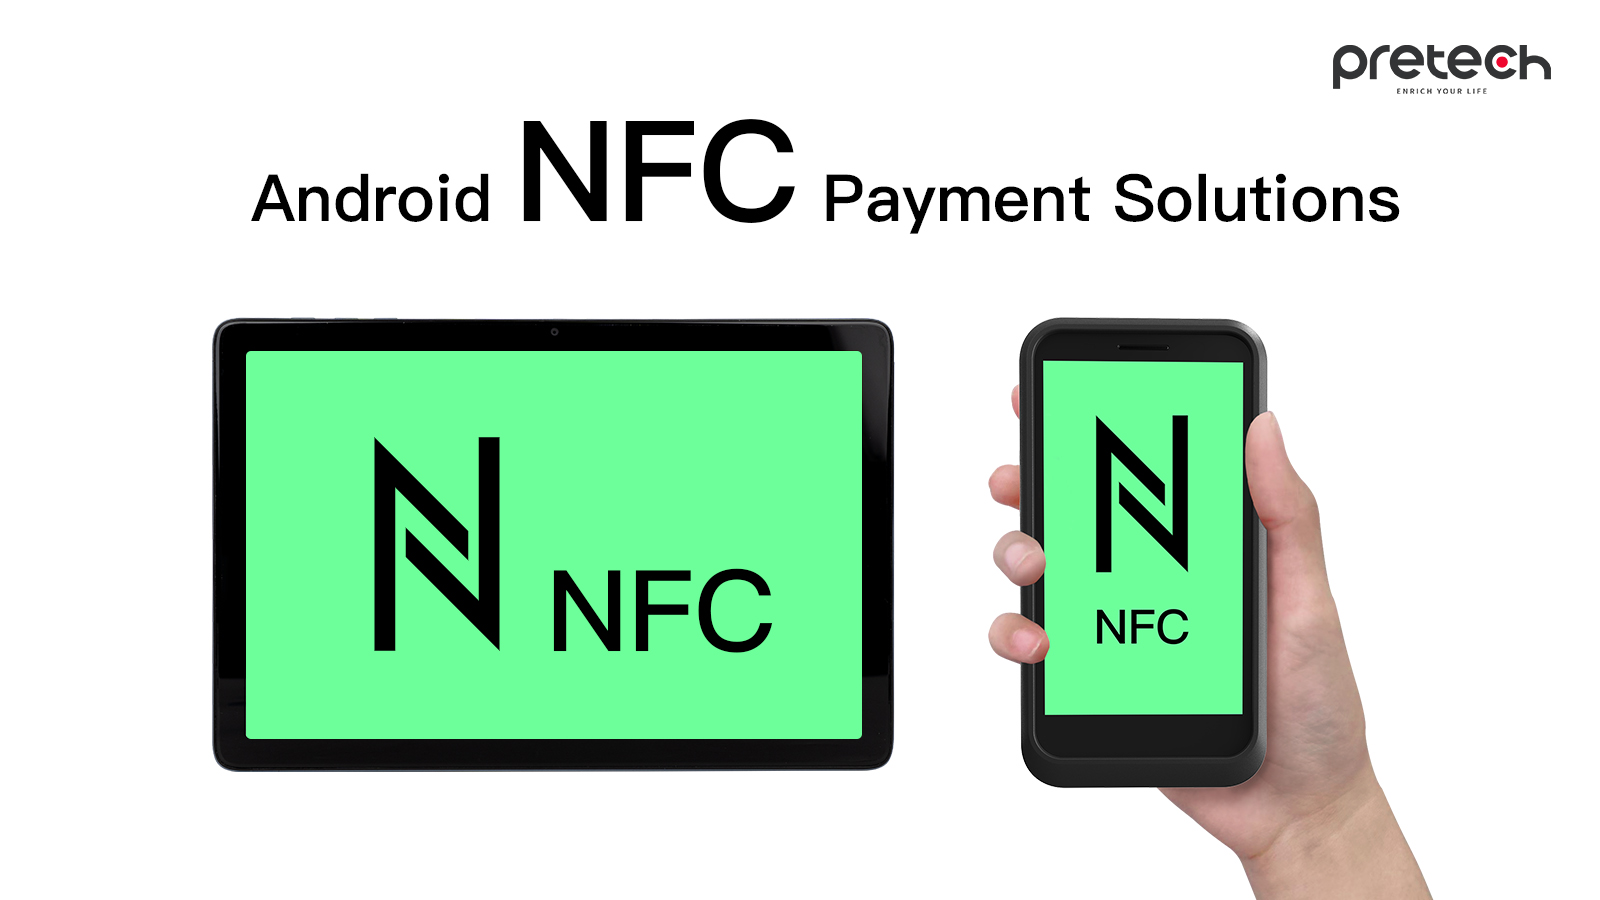 Pretech's User-Centric NFC Payment Solutions